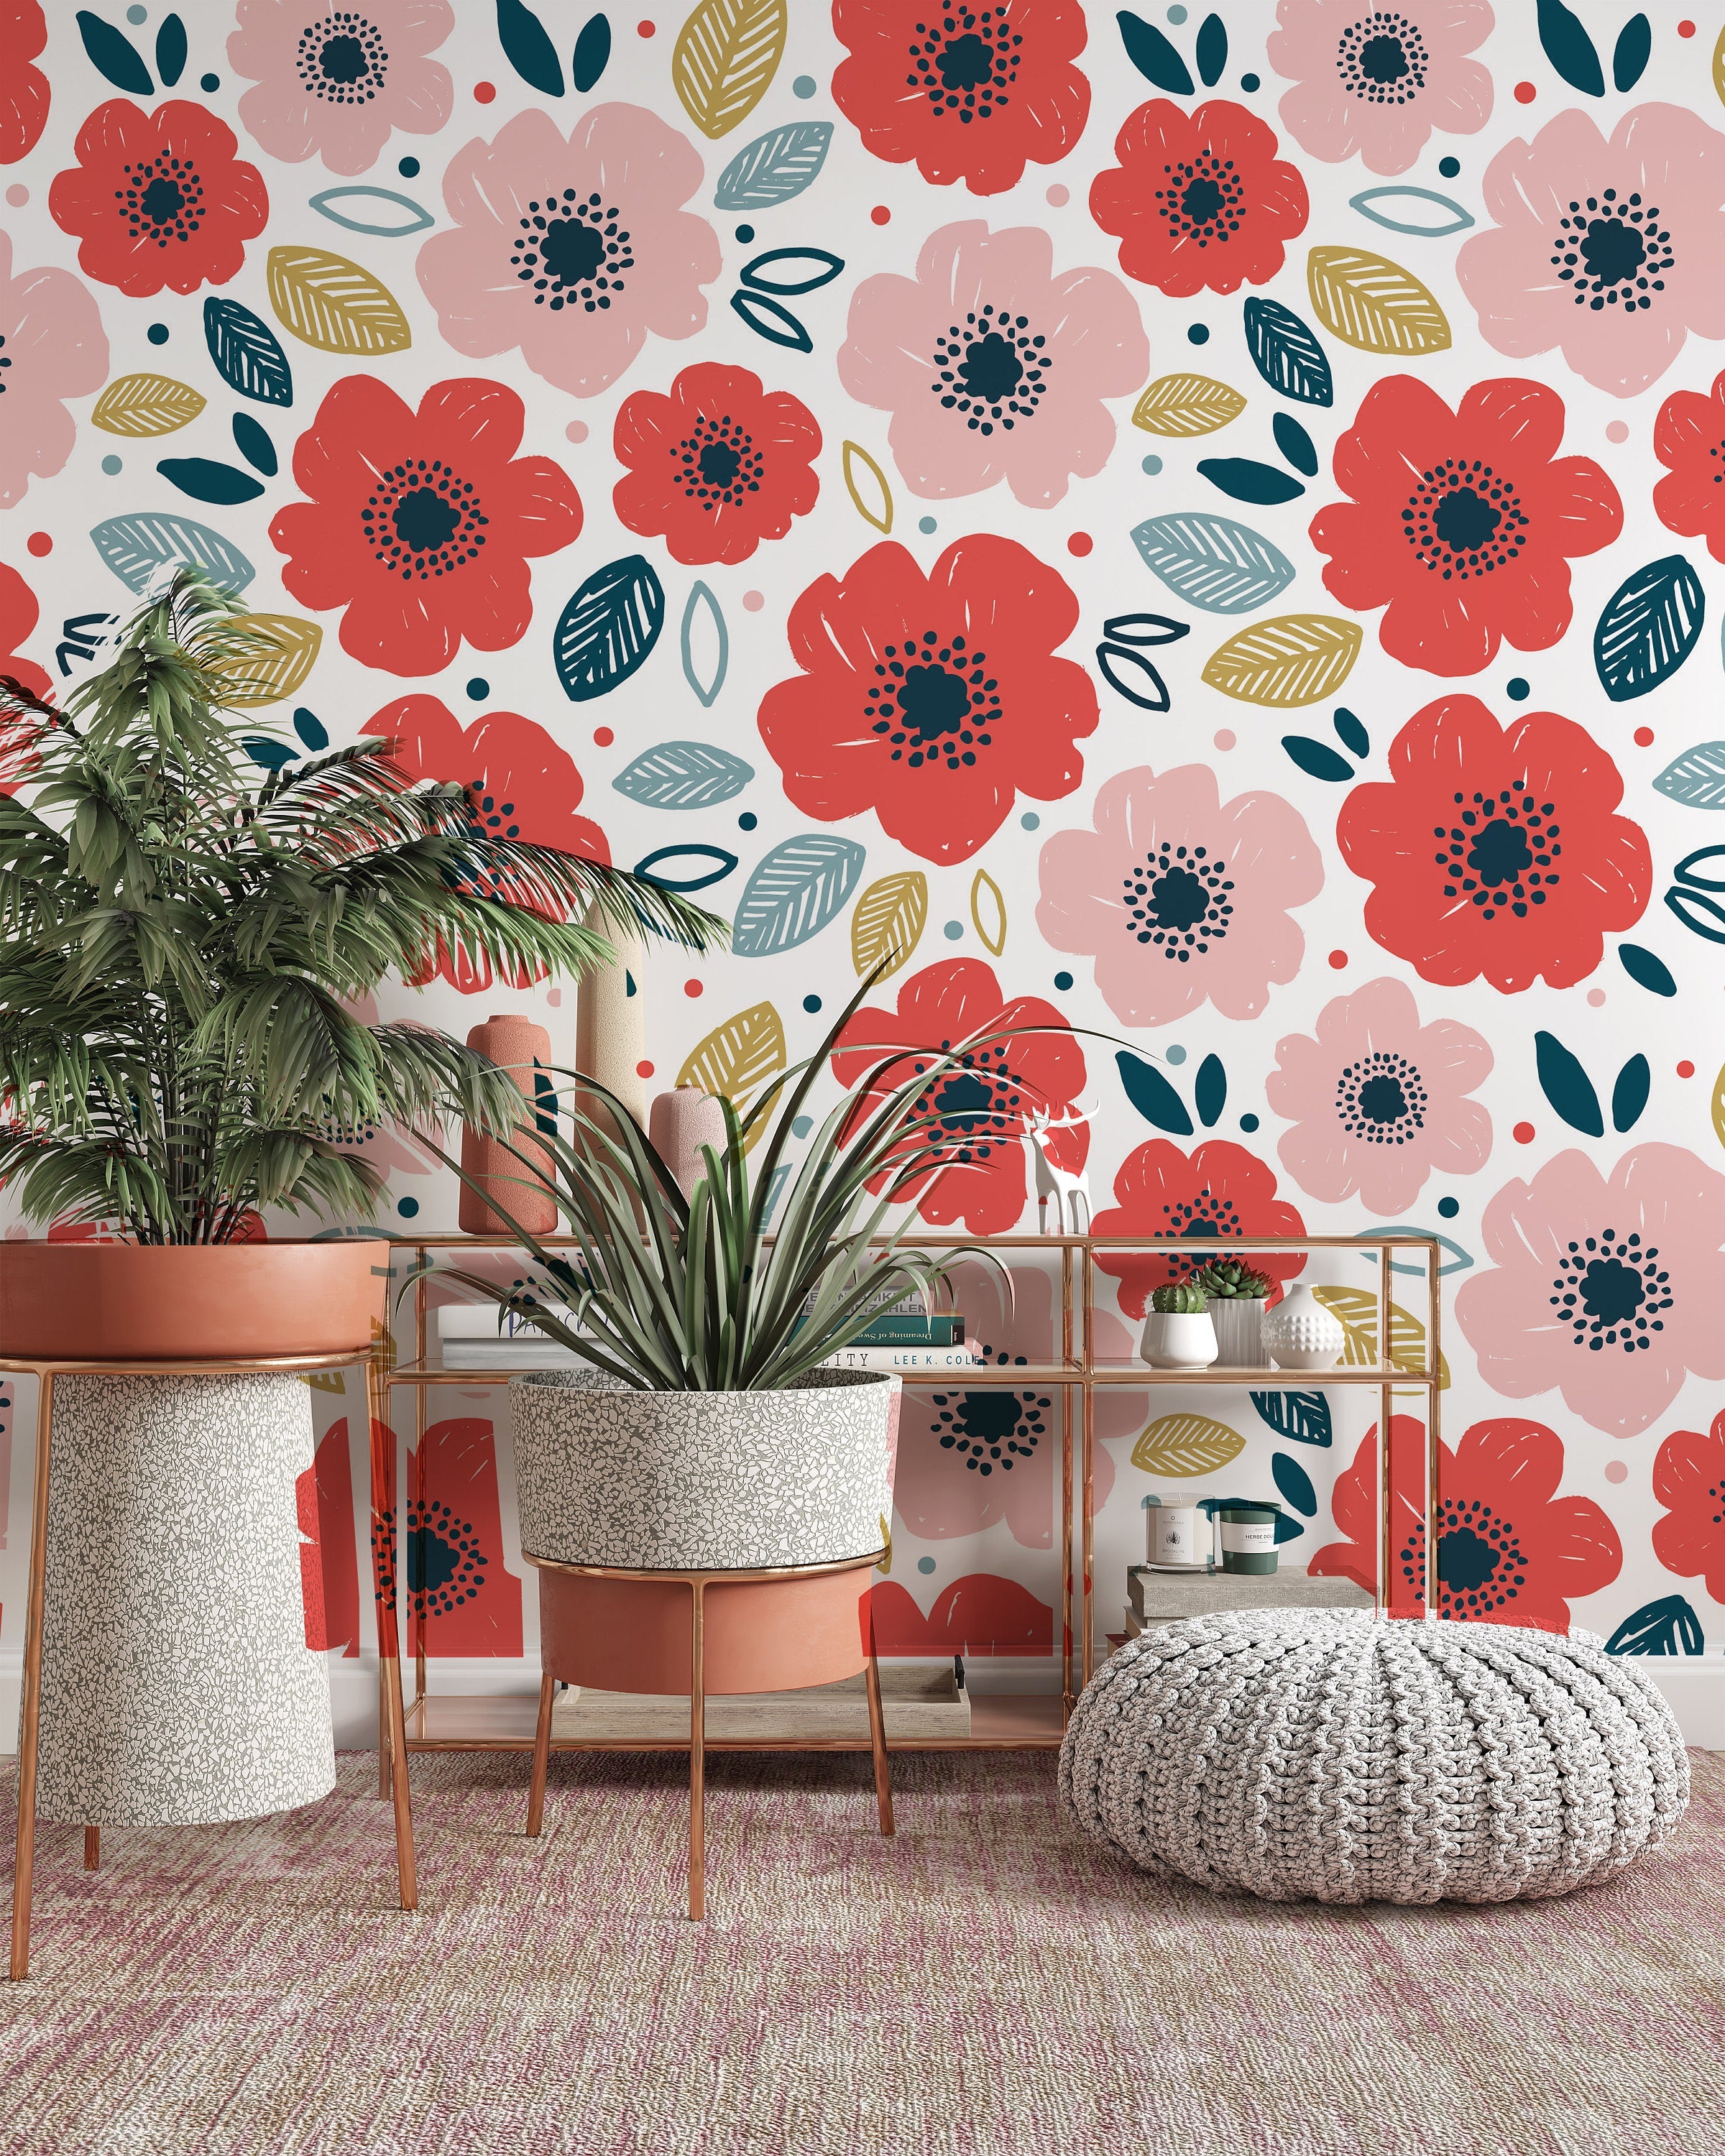 Anemone Red and Pink Flowers Leaves Background Floral Wallpaper Restaurant Living Room Bedroom Mural Home Wall Art Mural